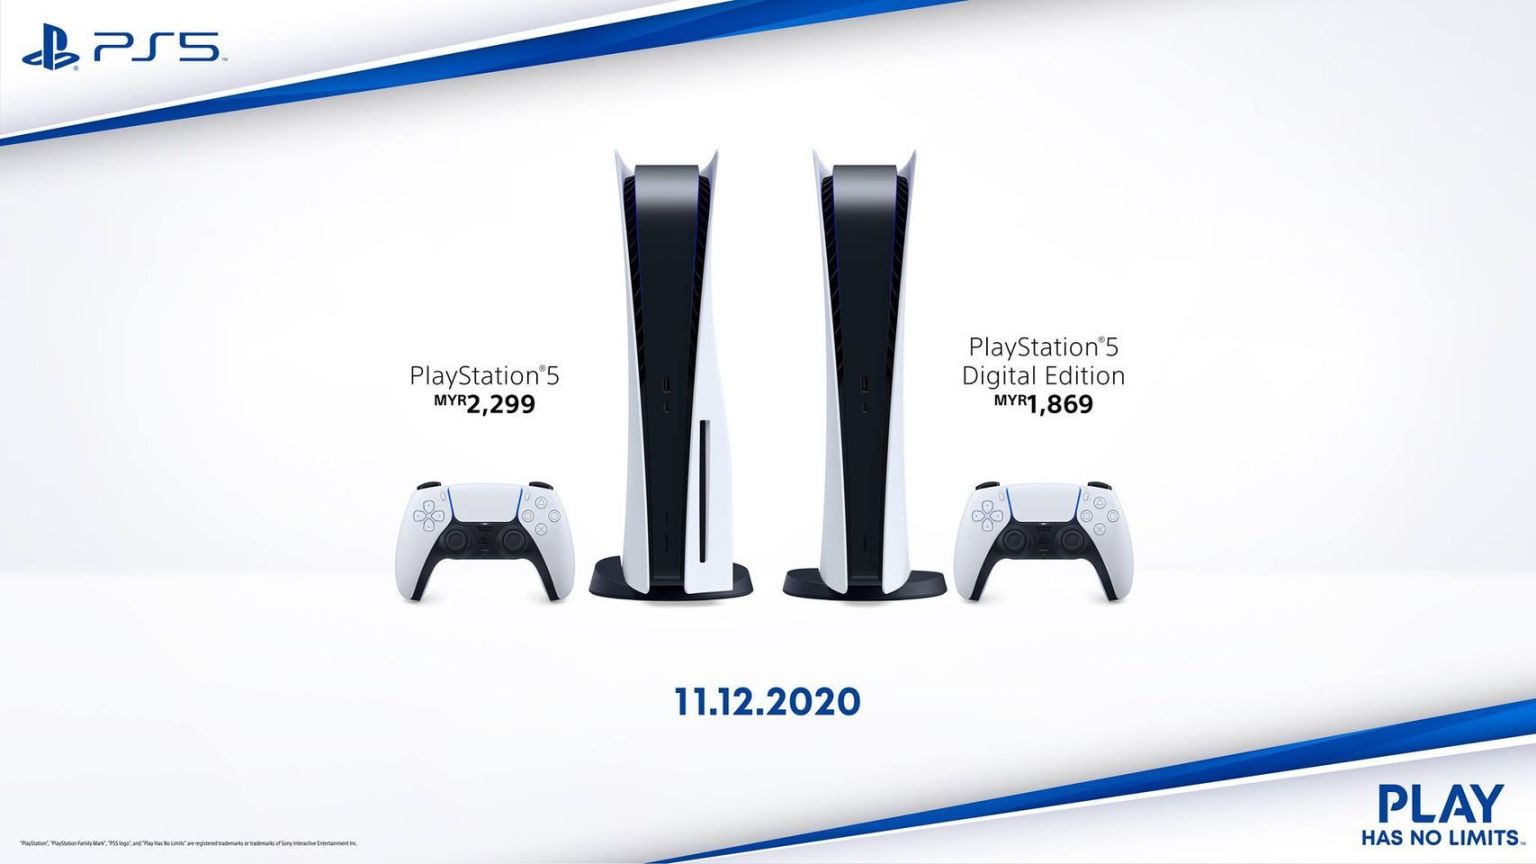 Sony PS5 series will be available in Malaysia from 12th November 